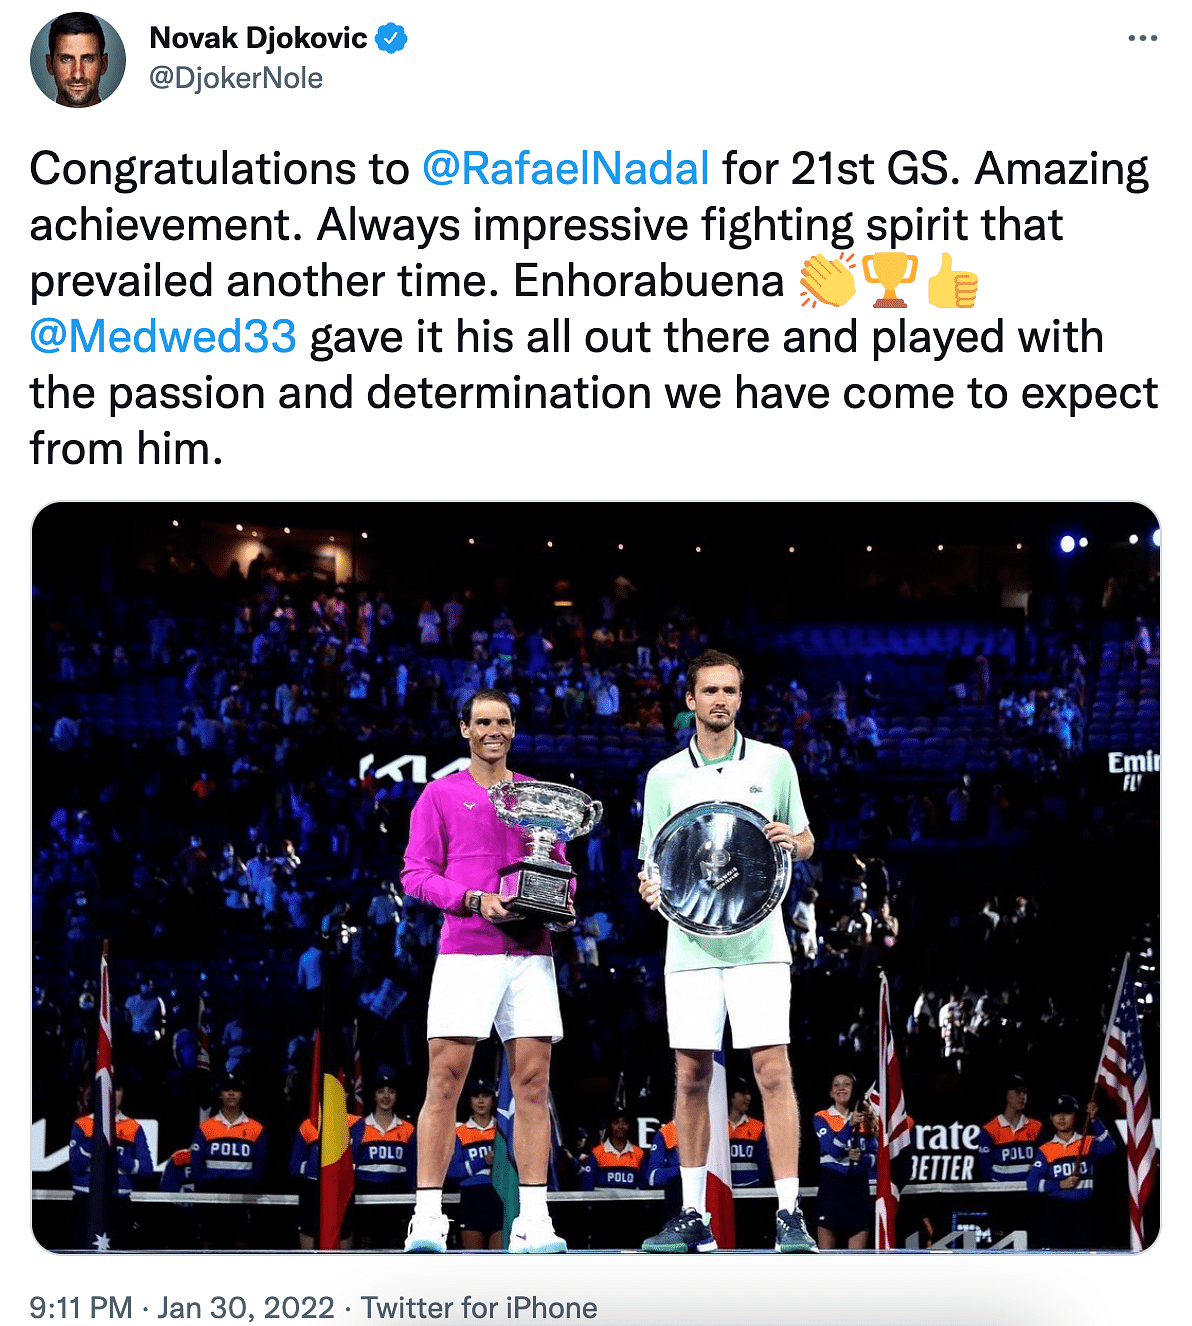 Rafael Nadal has become the first male player to win 21 Grand Slam titles.